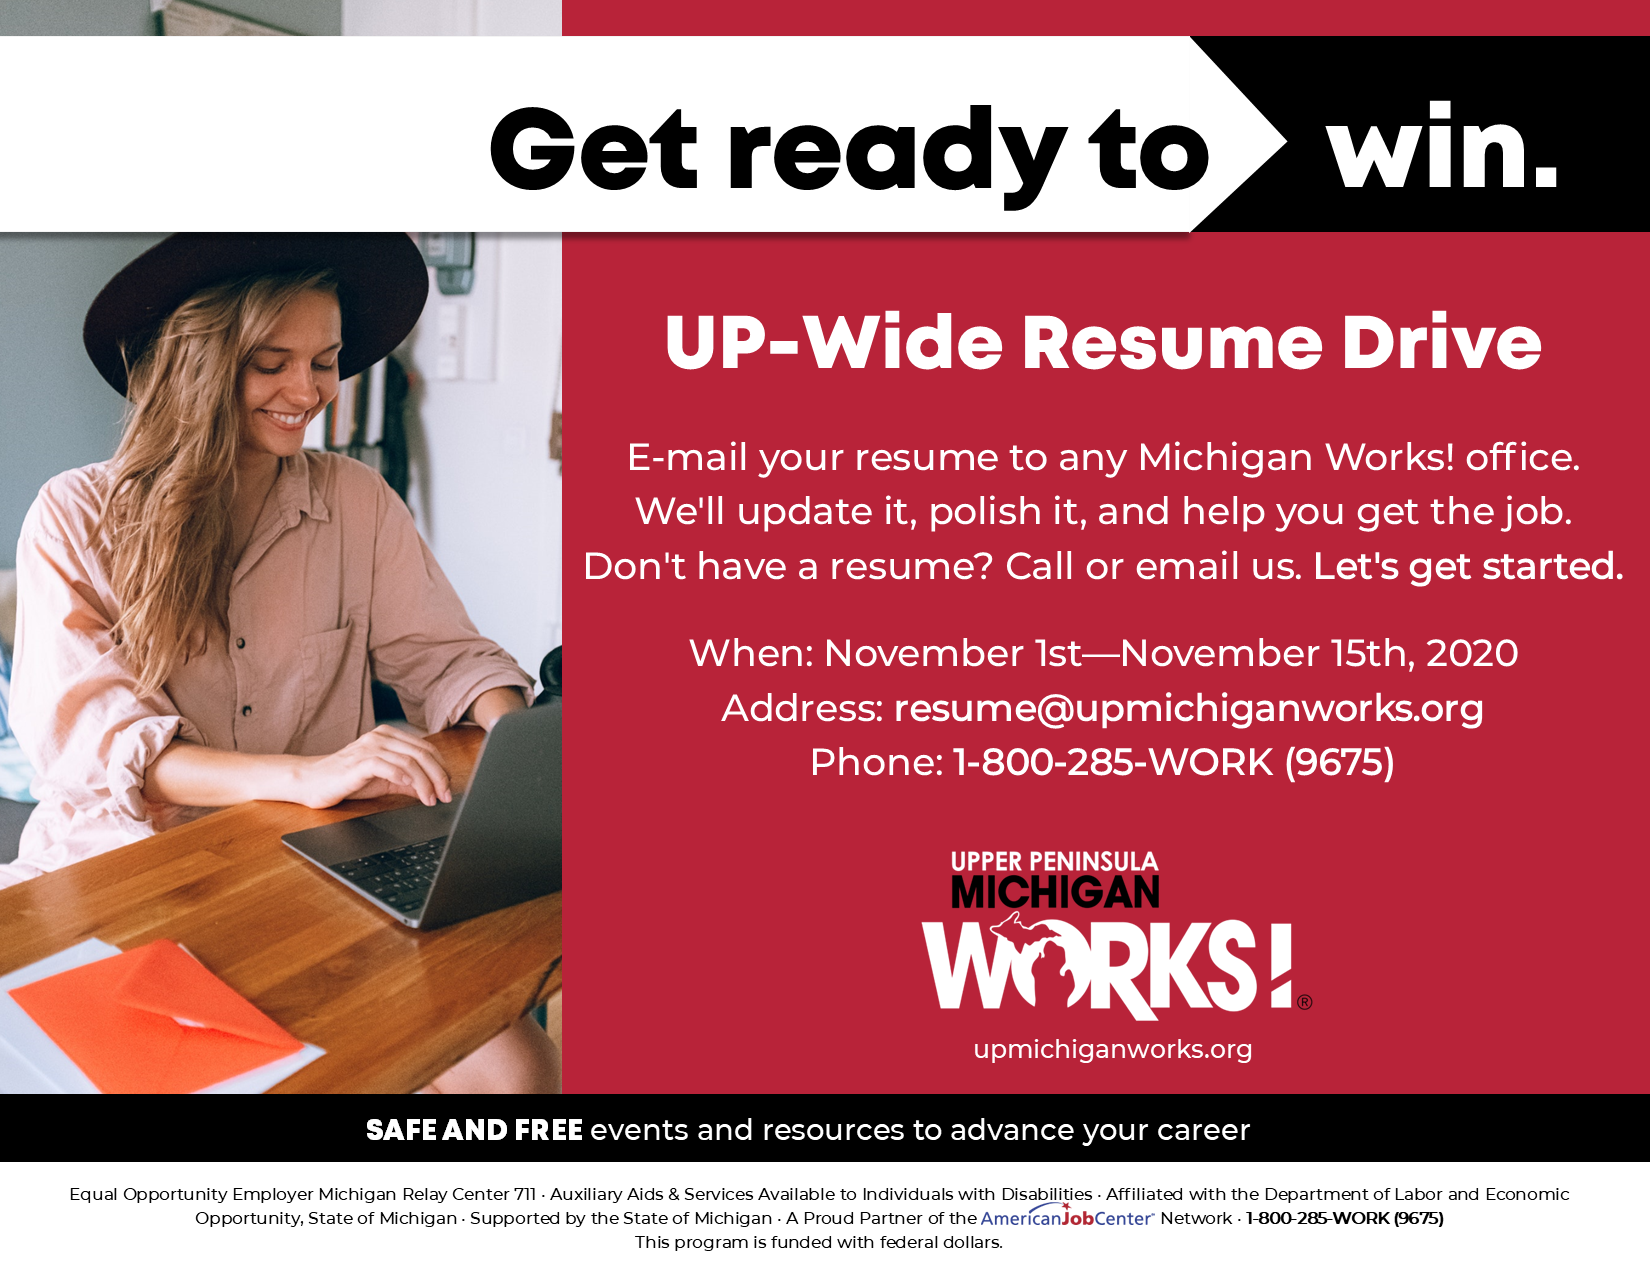 A flyer for the UPMW resume drive in November which takes place from November 1st to the 15th. Email resumes to resume@upmichiganworks.org.